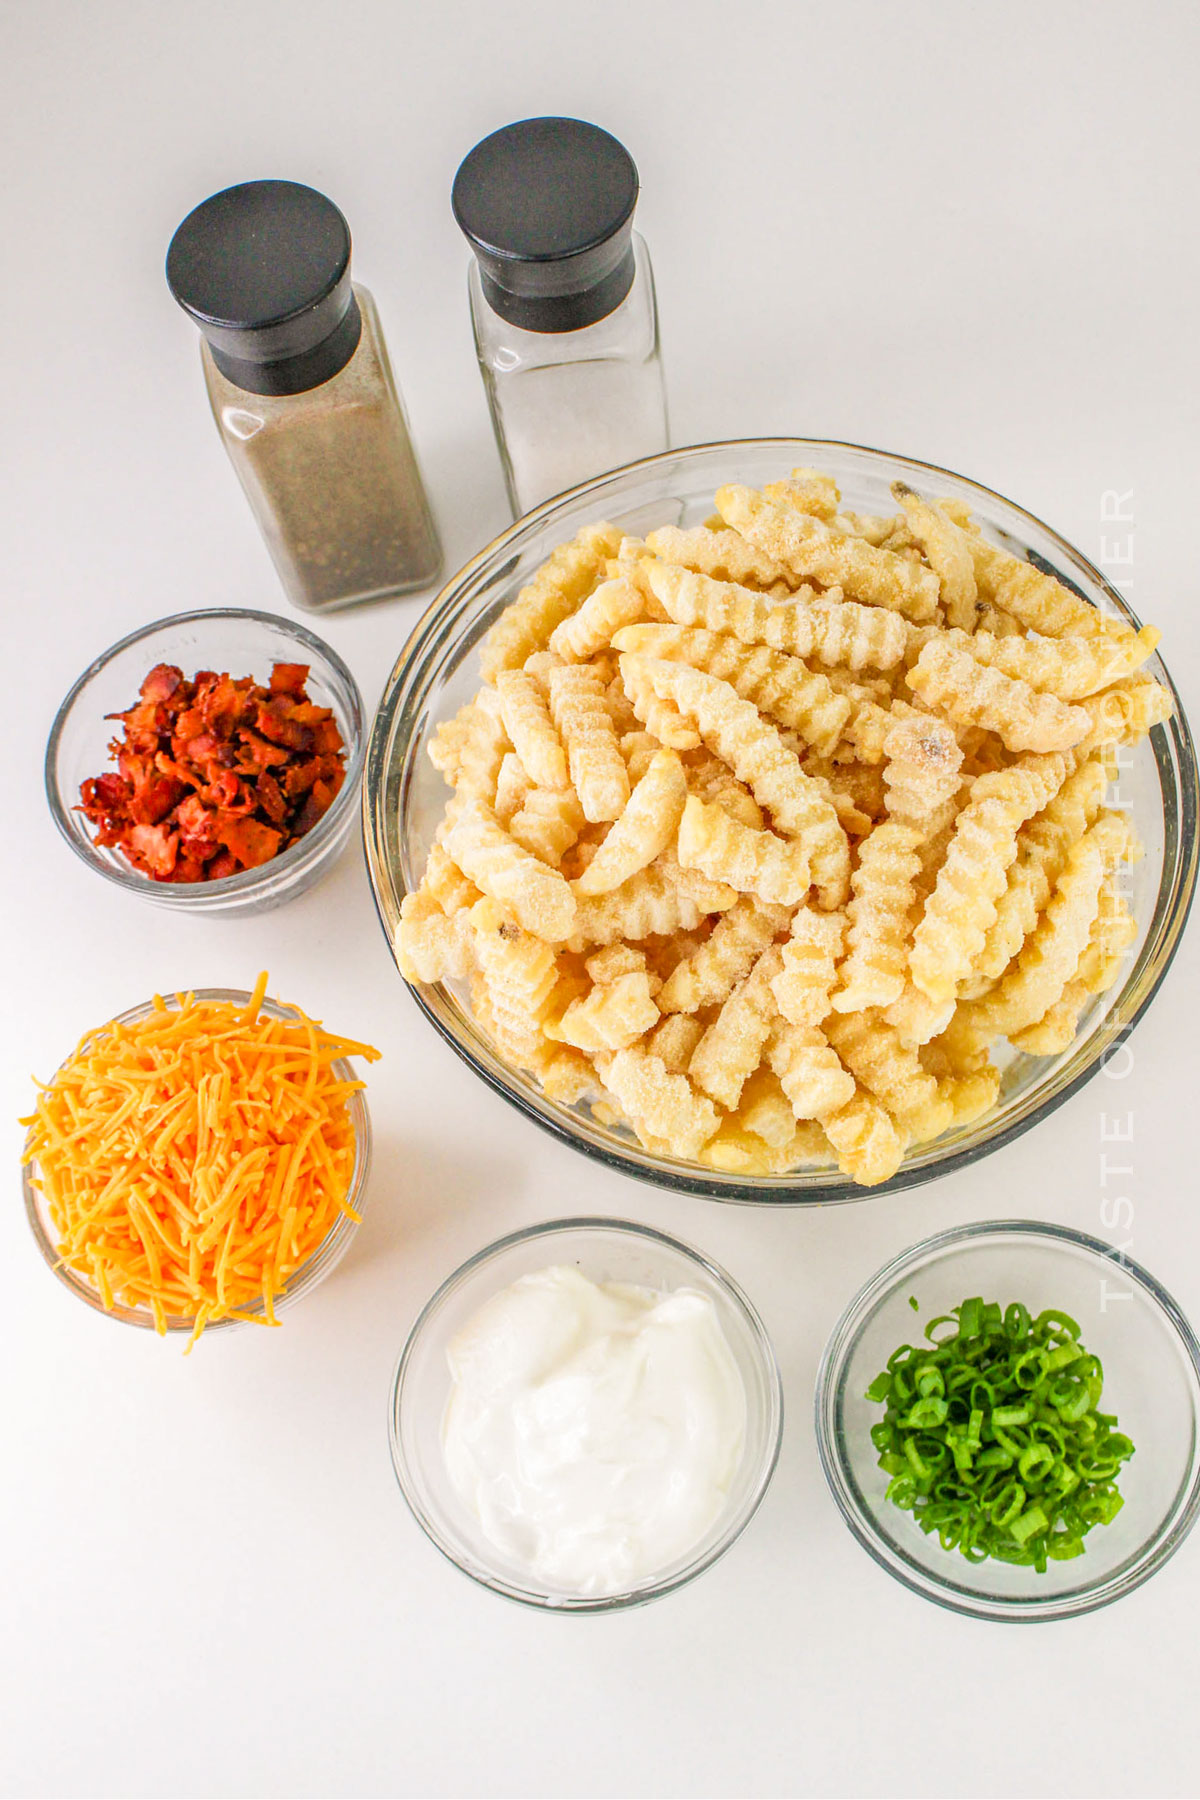 Loaded French Fry ingredients